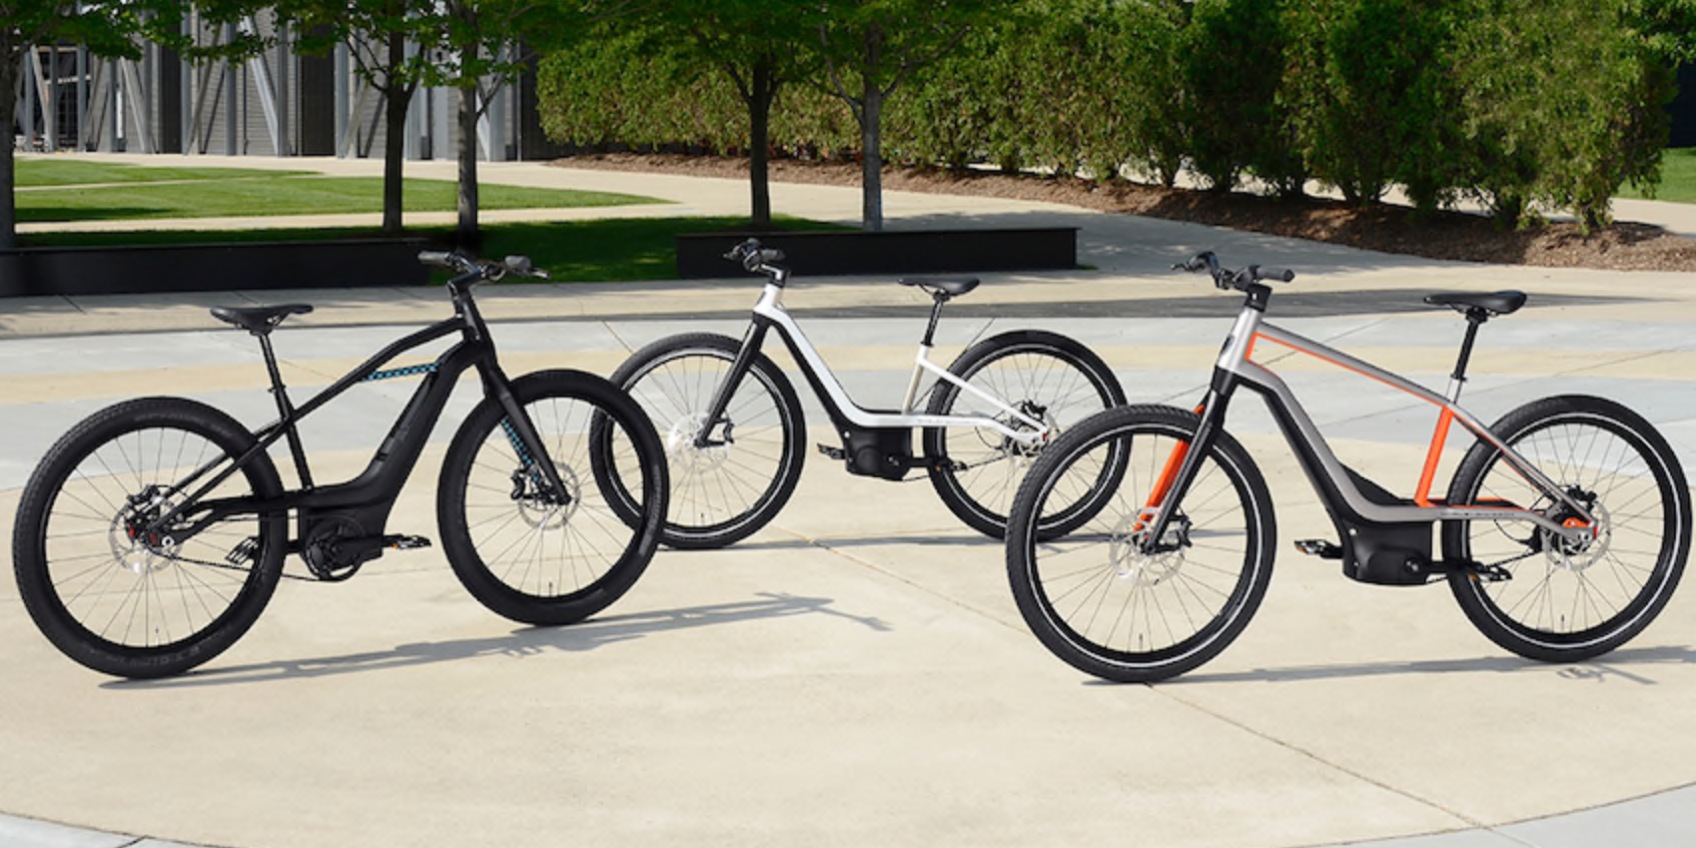 Harley Davidson Shows Off New Electric Bike Design As In Electric Bicycle